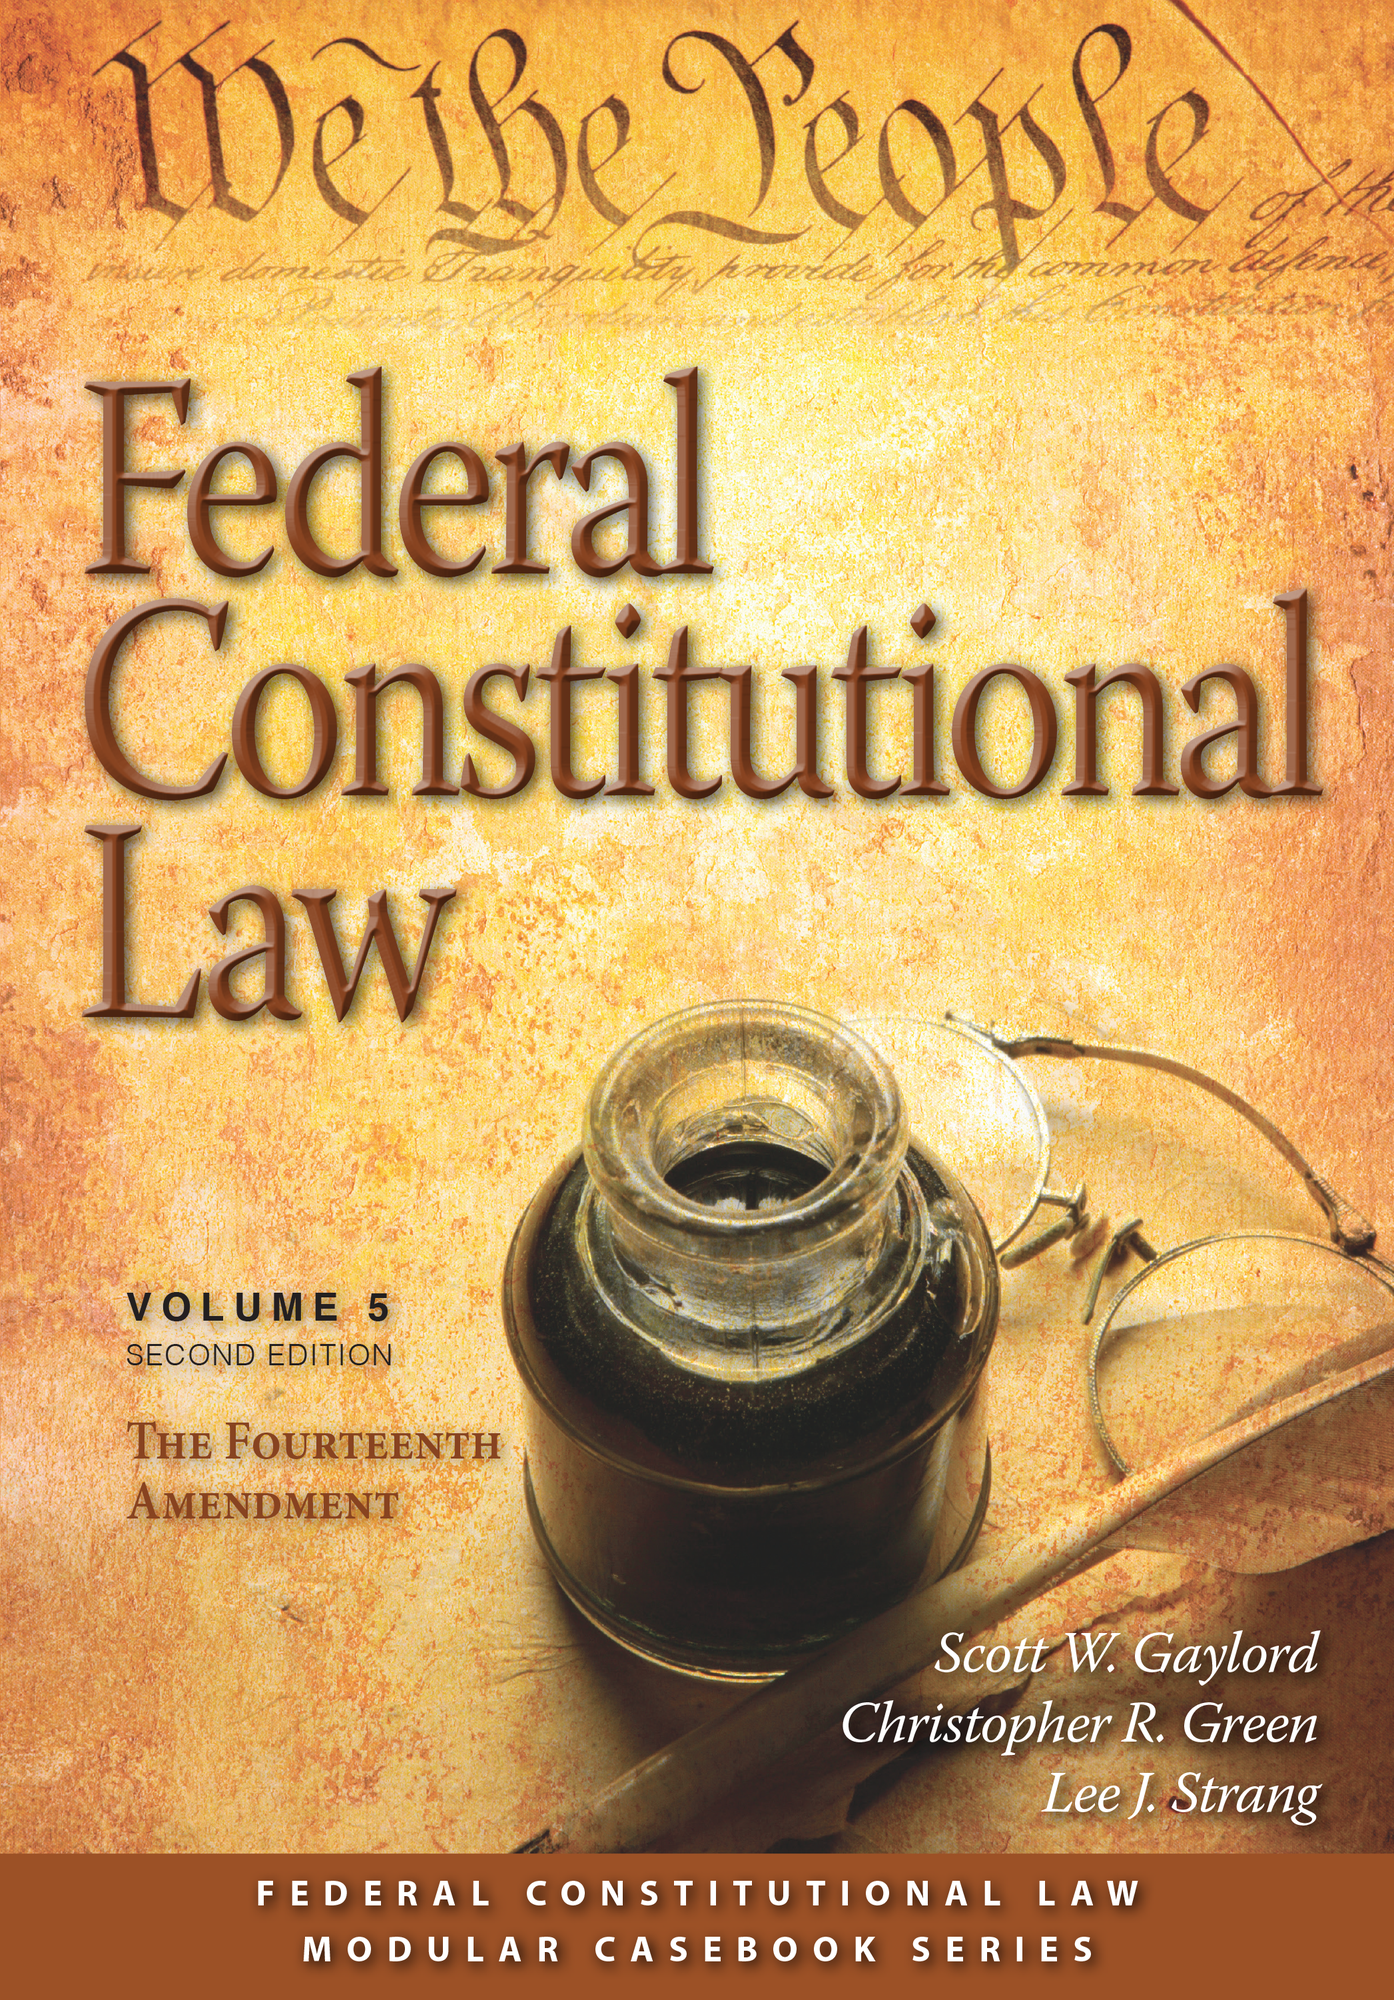 Federal Constitutional Law (Volume 5)